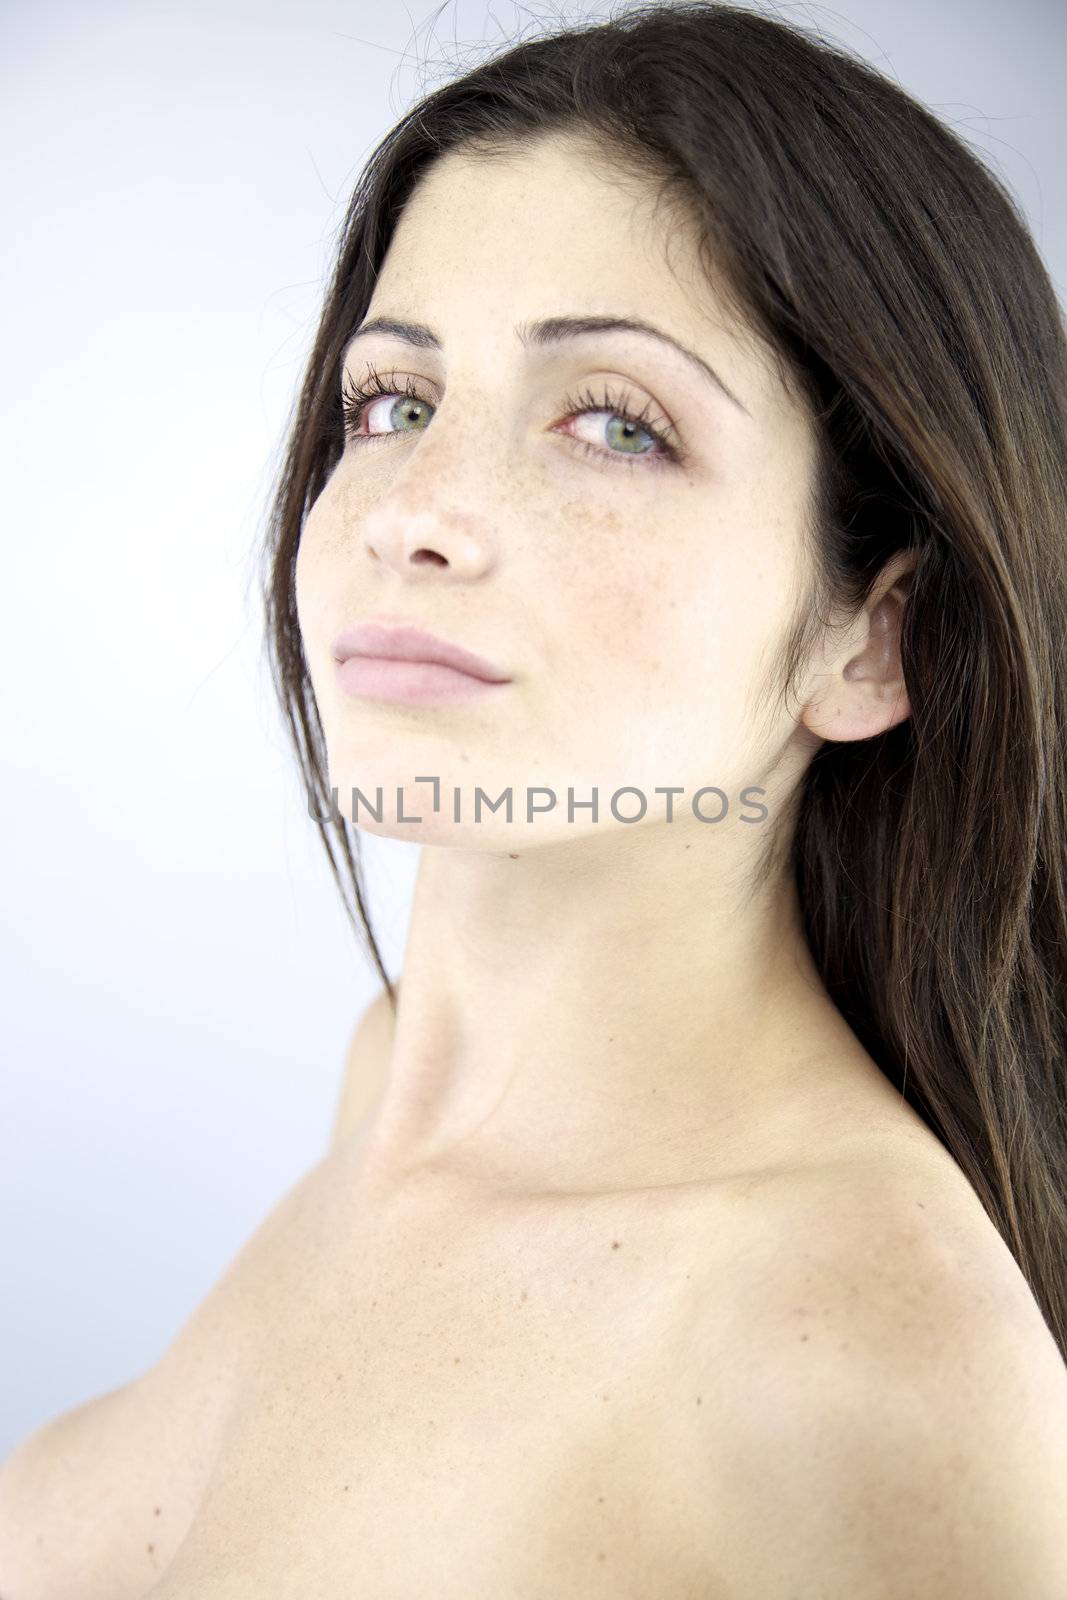 Beautiful naked lady looking seriousGorgeous naked woman with green eyes by fmarsicano